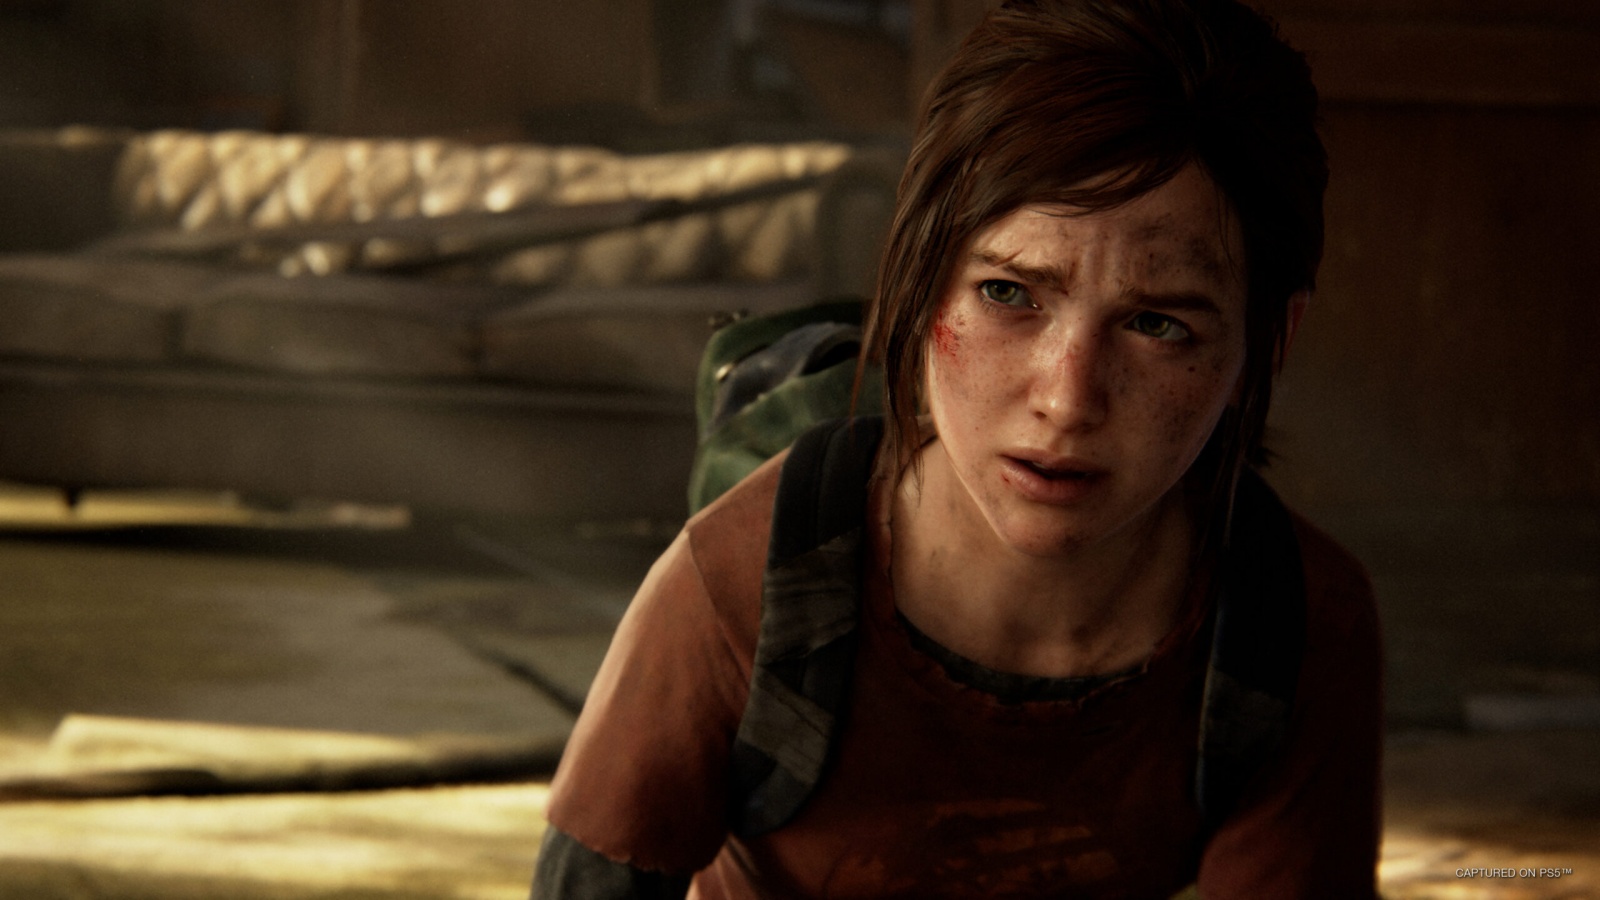 The Last of Us Part 1's PC Port Delayed 3 Weeks - IGN